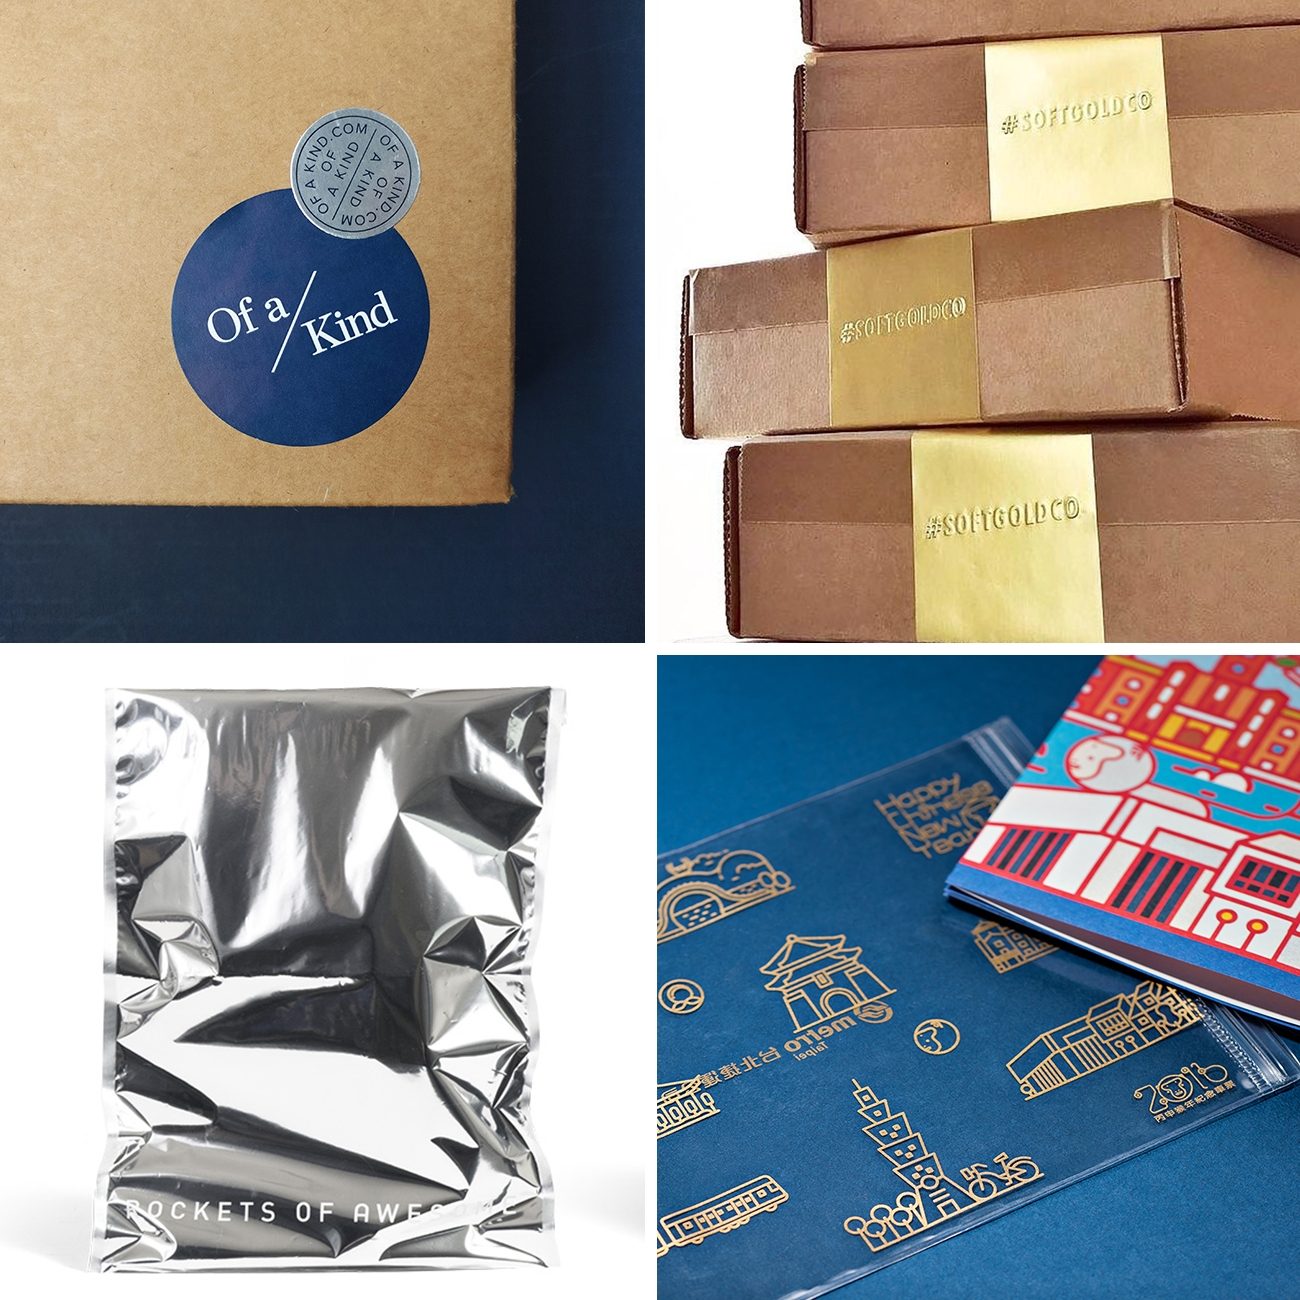 Photos via: FourPlus and Ivaylo Nedkov, Lumi, Soft Gold Co, Lumi, Midnight Design and Kuocheng Liao 90 Ideas to Spruce Up Your Holiday Packaging Design